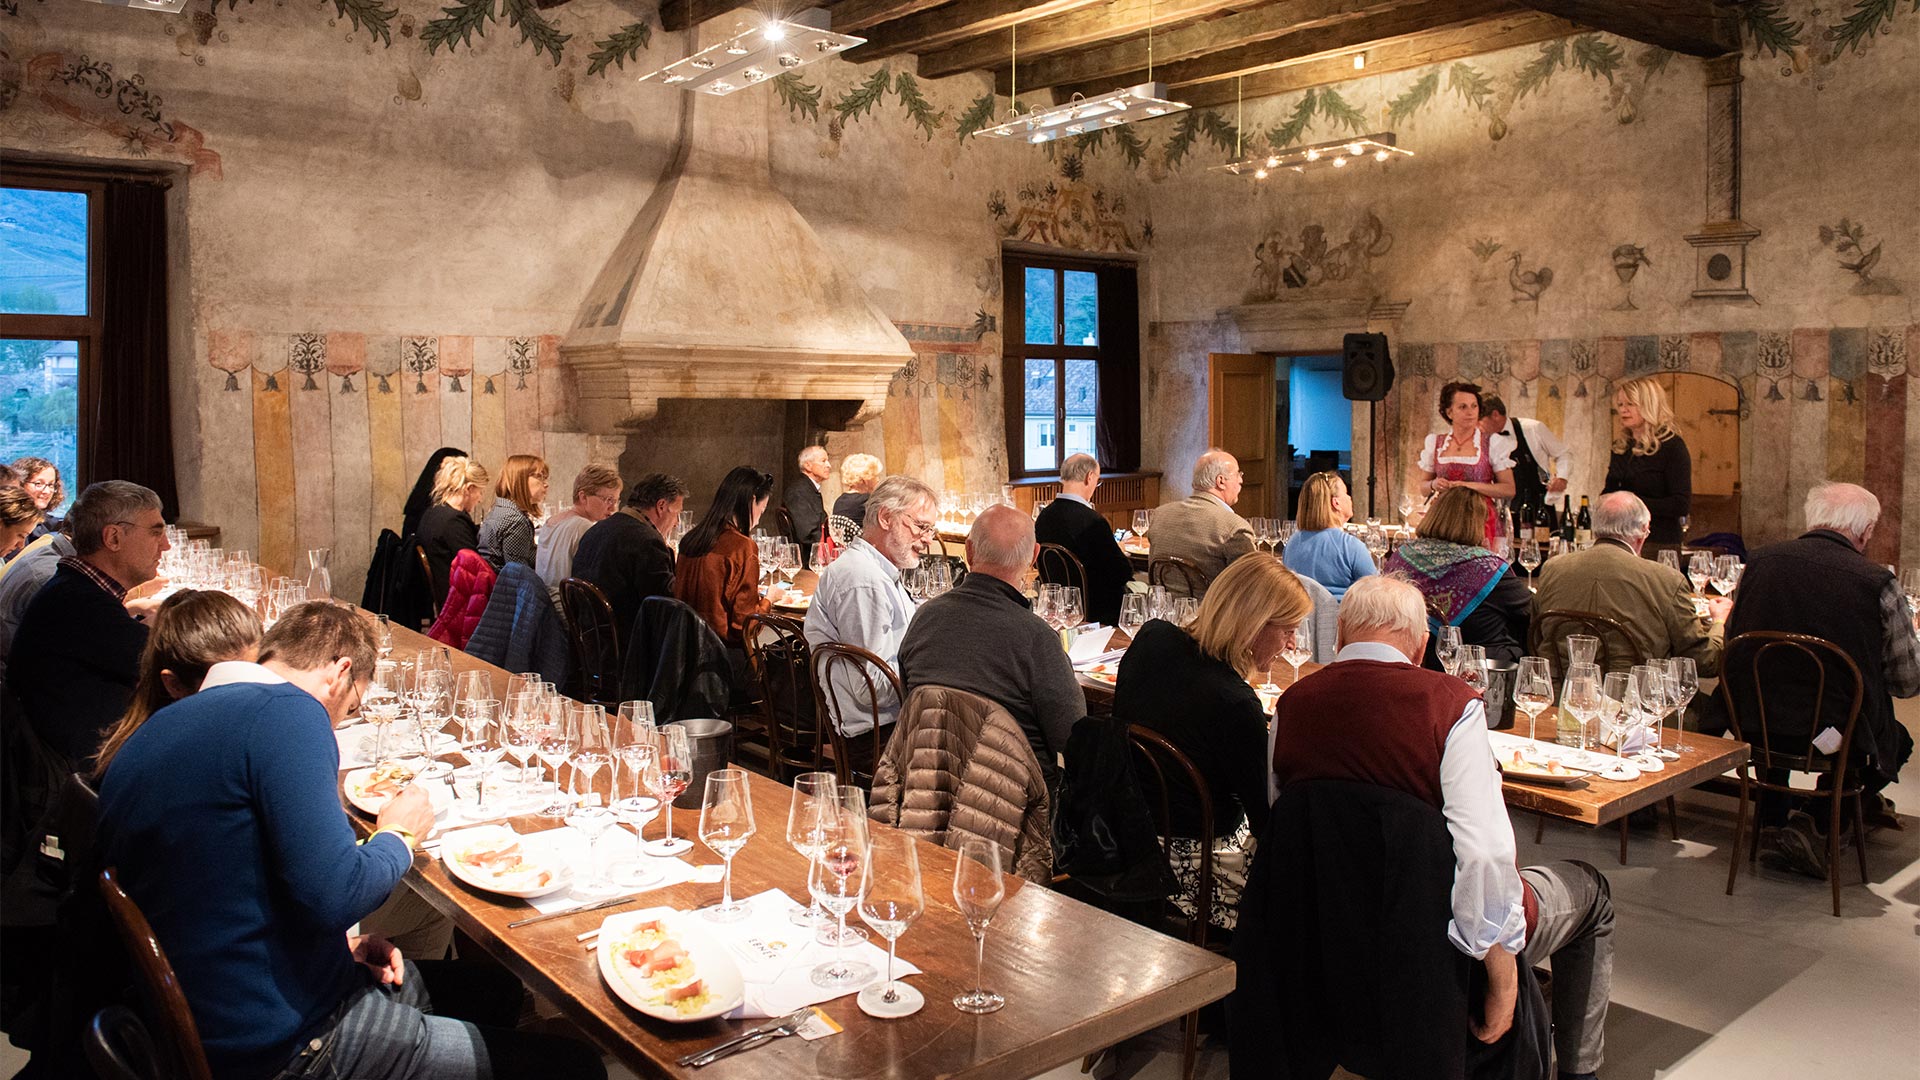 Groups of customers intent on eating inside a traditional restaurant in Bolzano are about to see a small show organised by the restaurateurs.